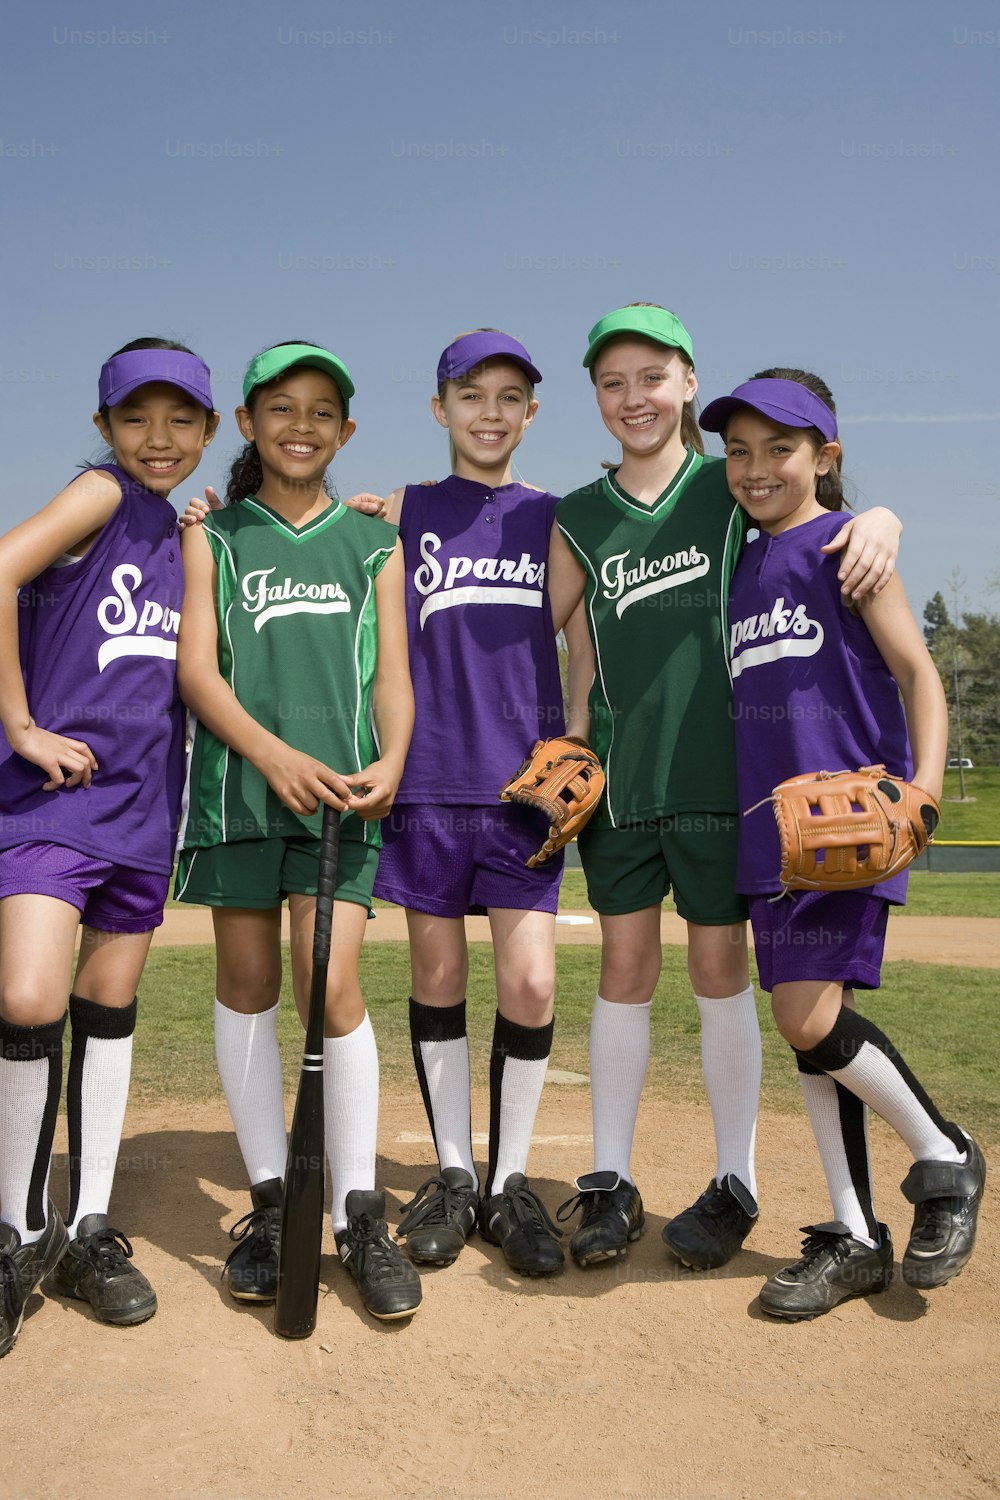 a group of young girls standing next to each other on a baseball field